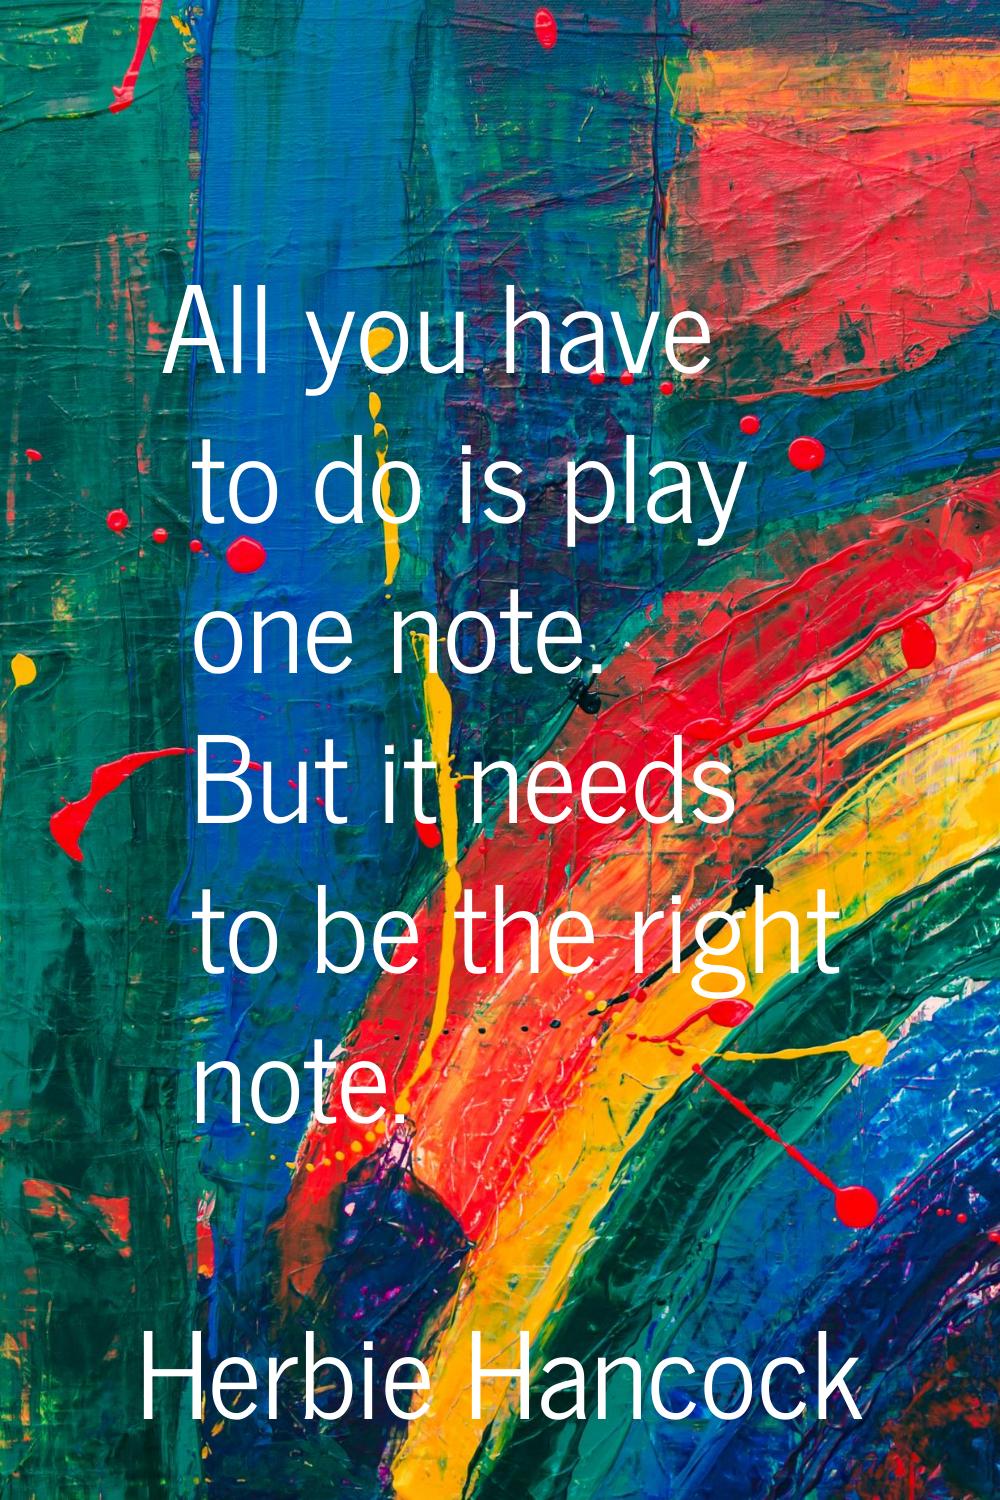 All you have to do is play one note. But it needs to be the right note.